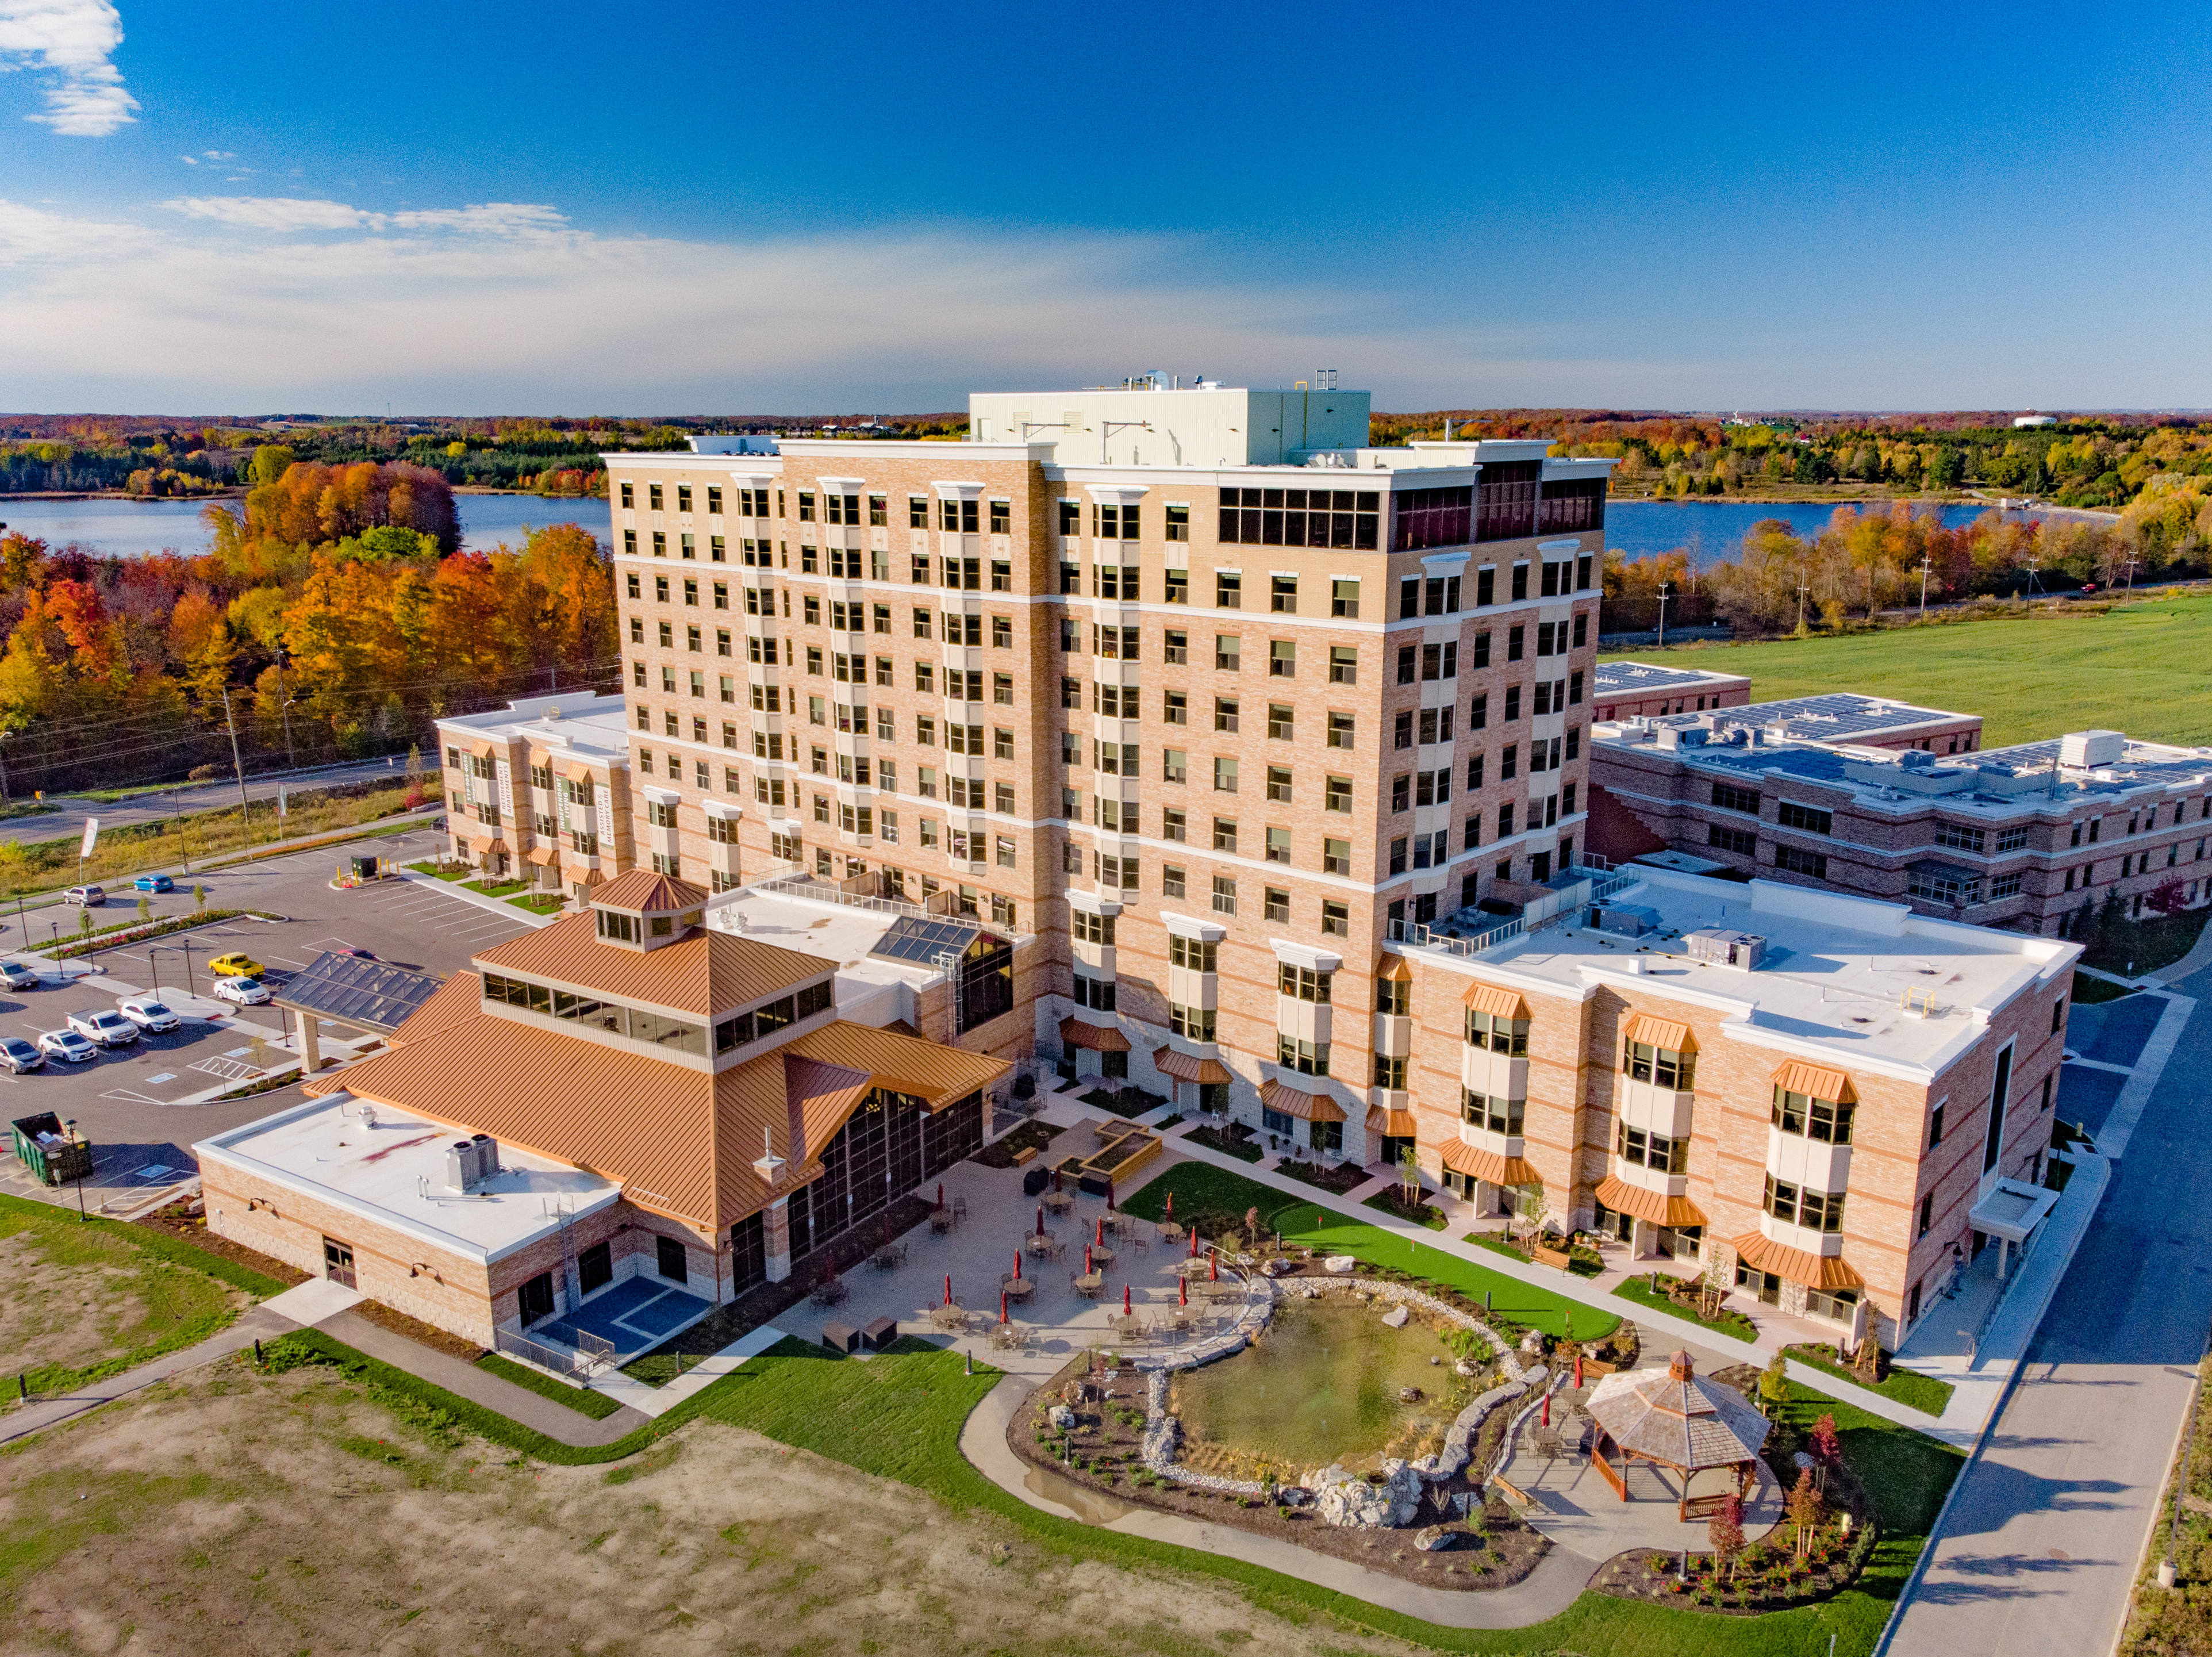 Birdseye view of the building at The Village at University Gates Retirement in Waterloo